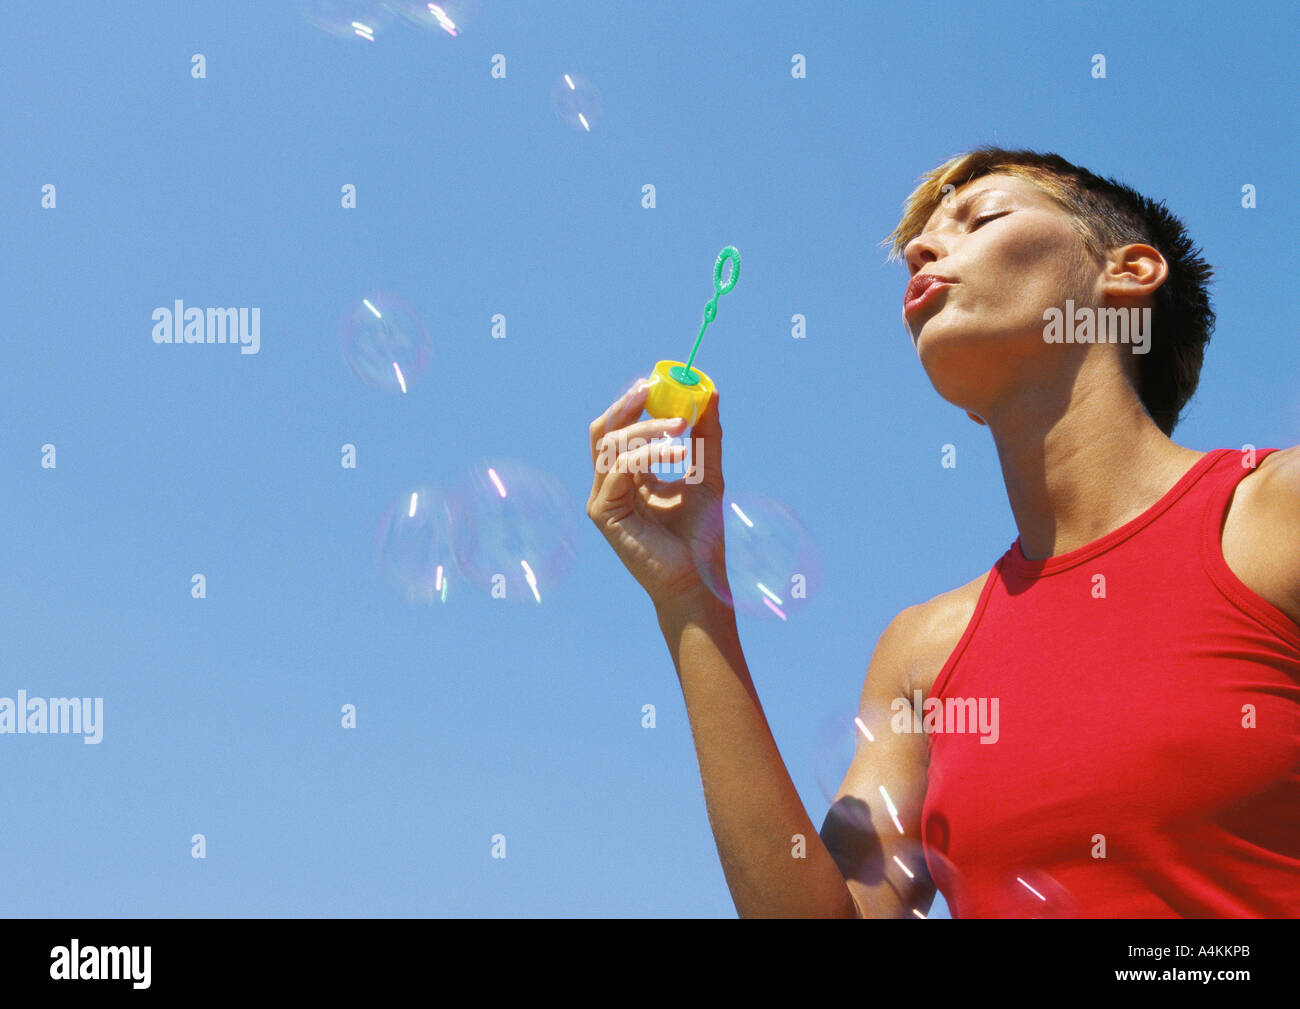 Woman blowing bubbles, low angle view Banque D'Images